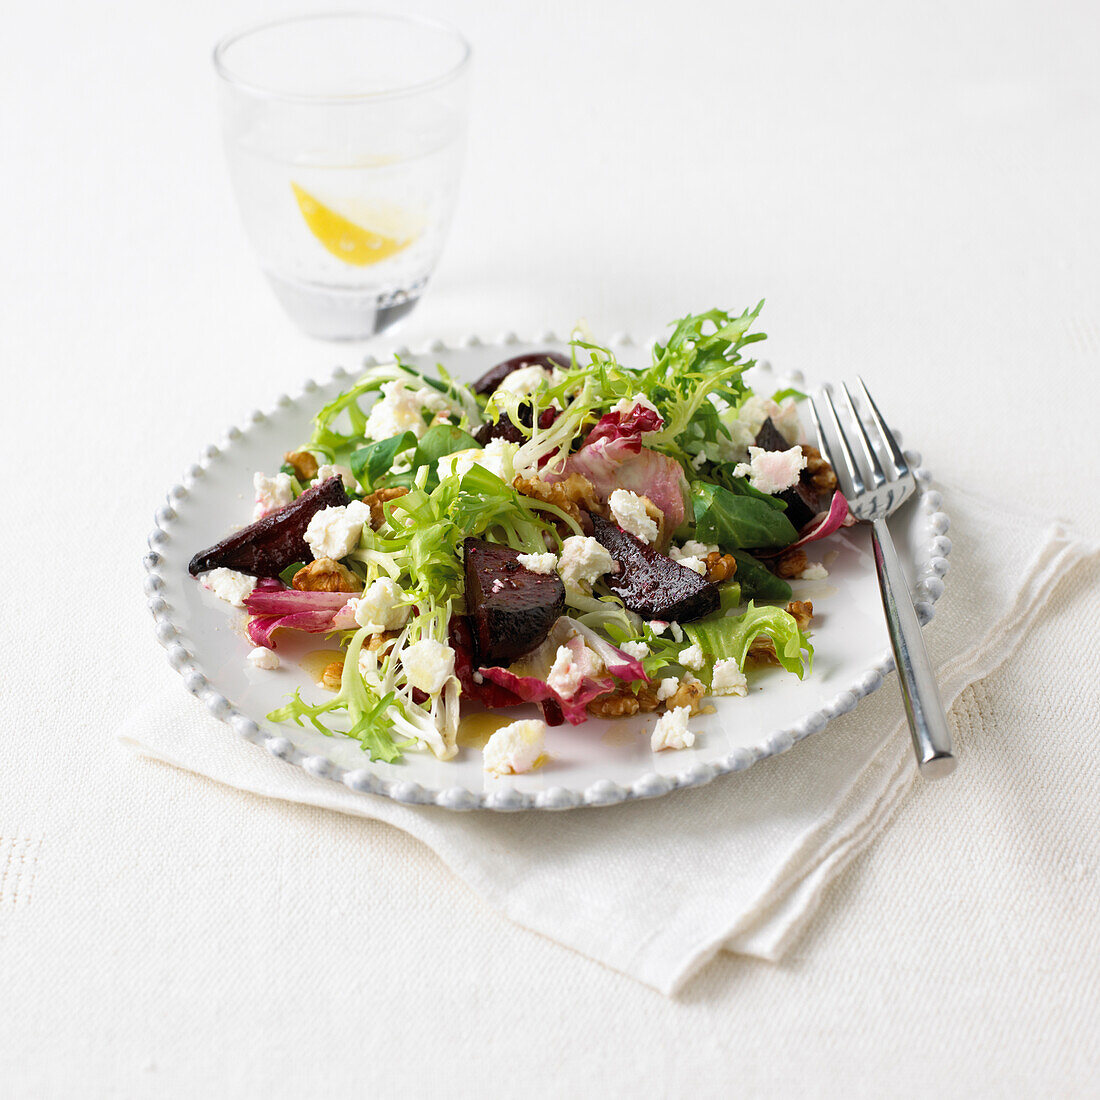 Beetroot, goat's cheese and walnut salad